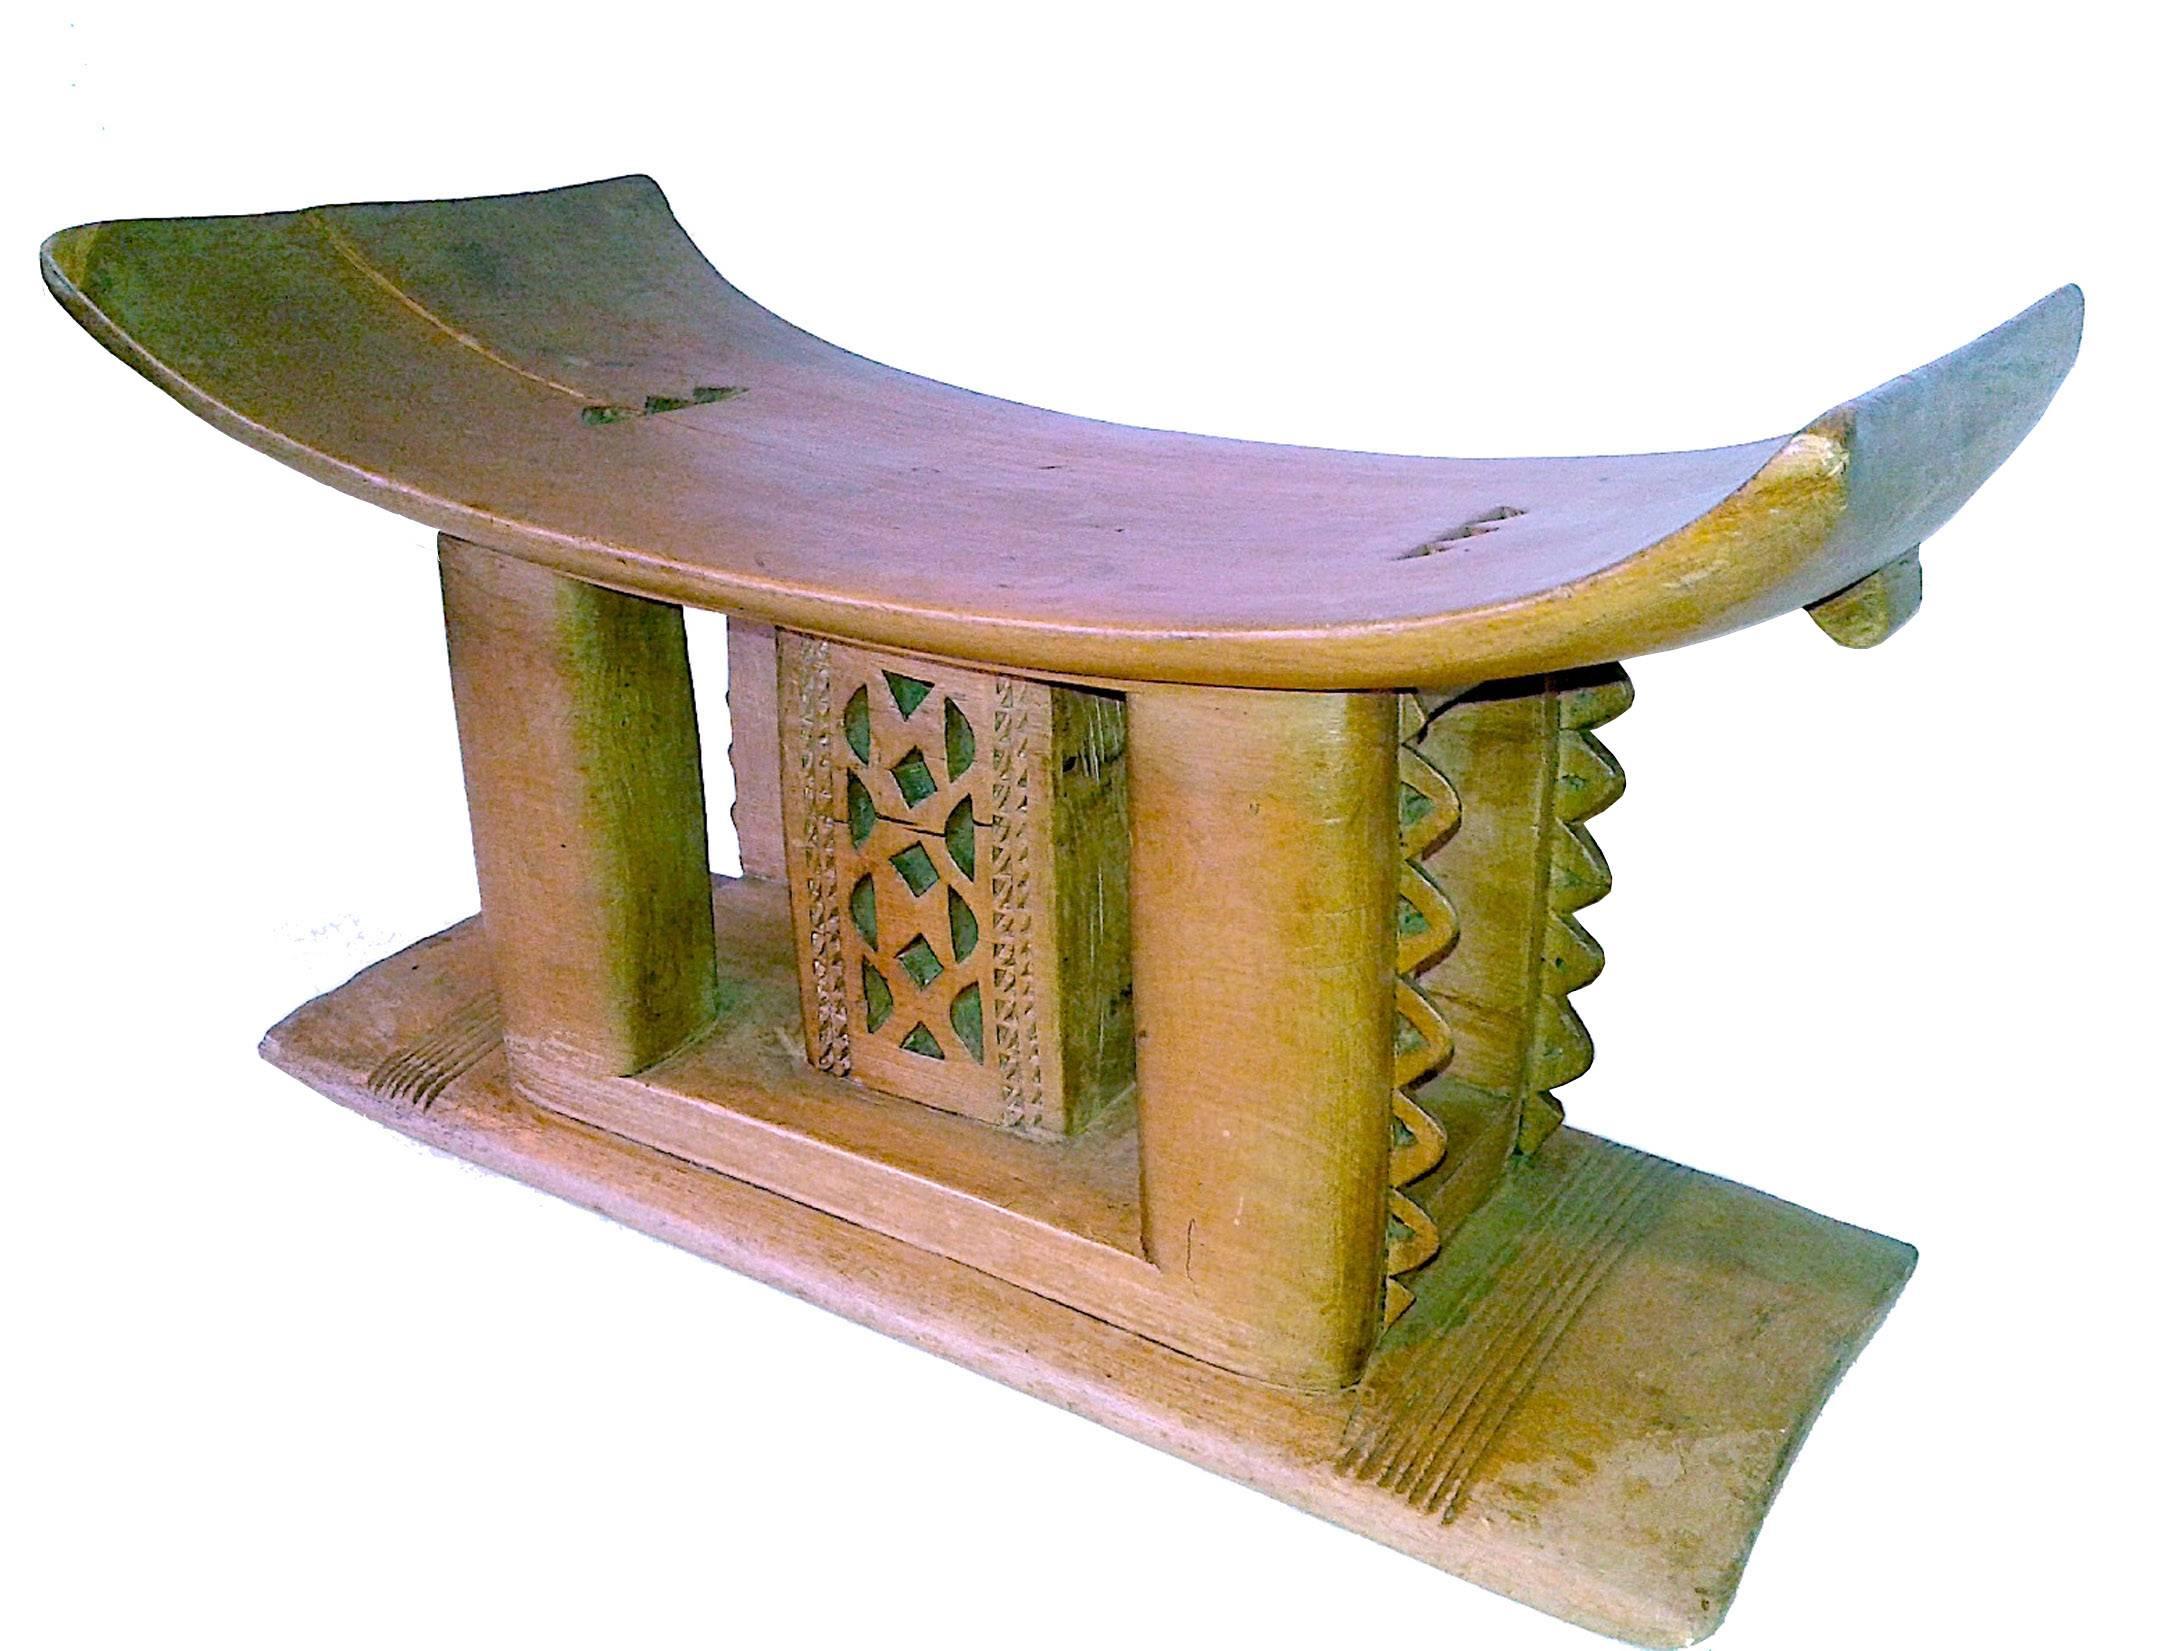 An Ashanti stool, traditional carved personal seat from Ghana. Carved from a single piece of wood. Use as a low end table, stand or seat.